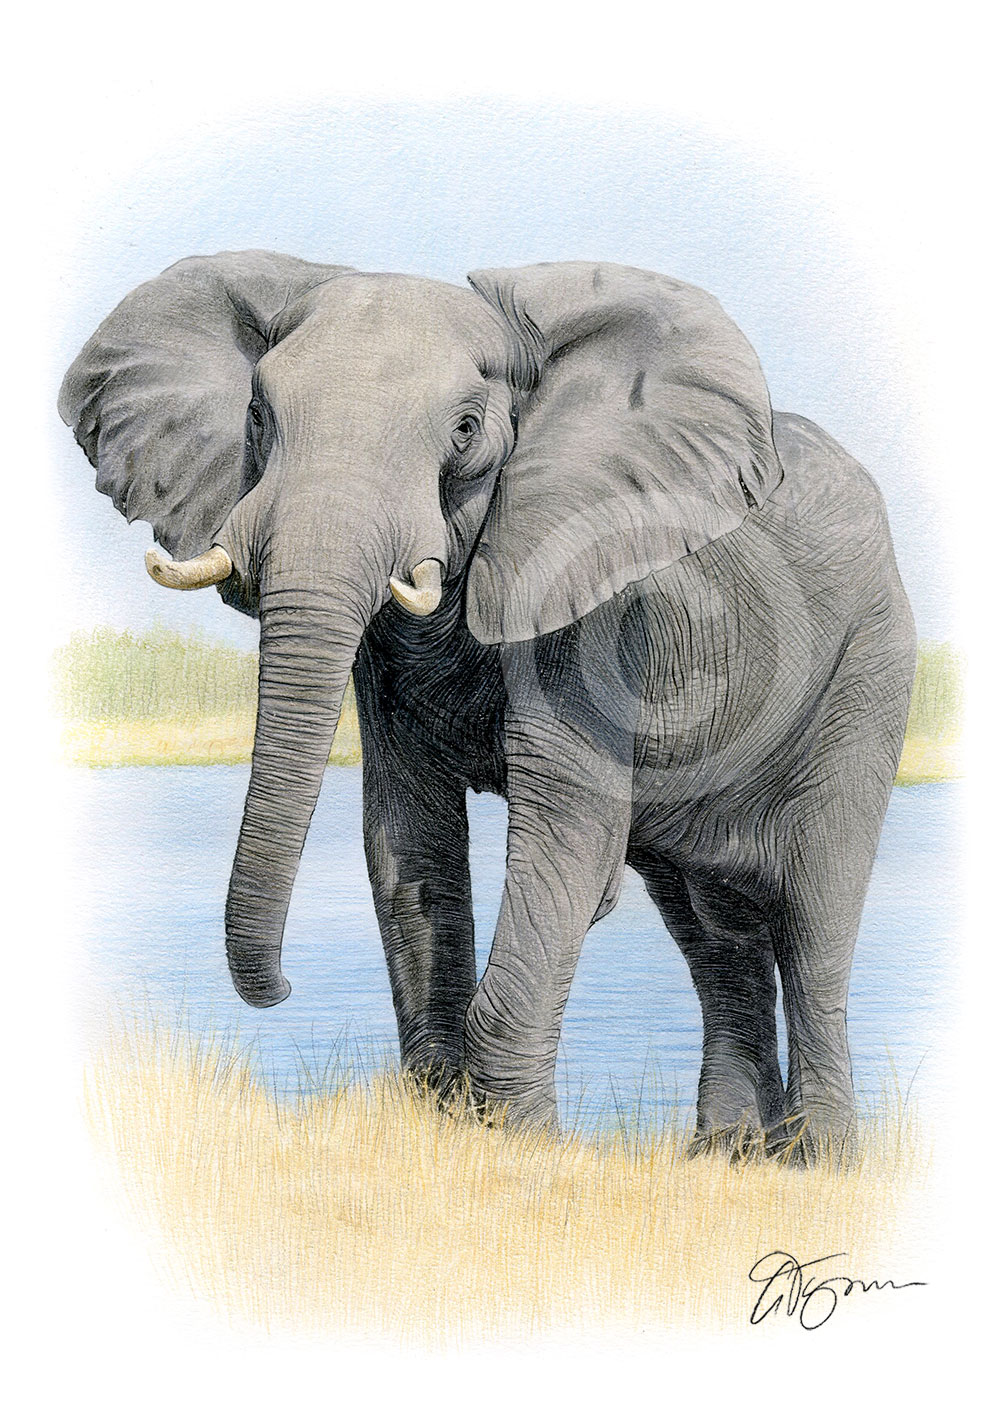 Colour pencil drawing of an African elephant by artist Gary Tymon